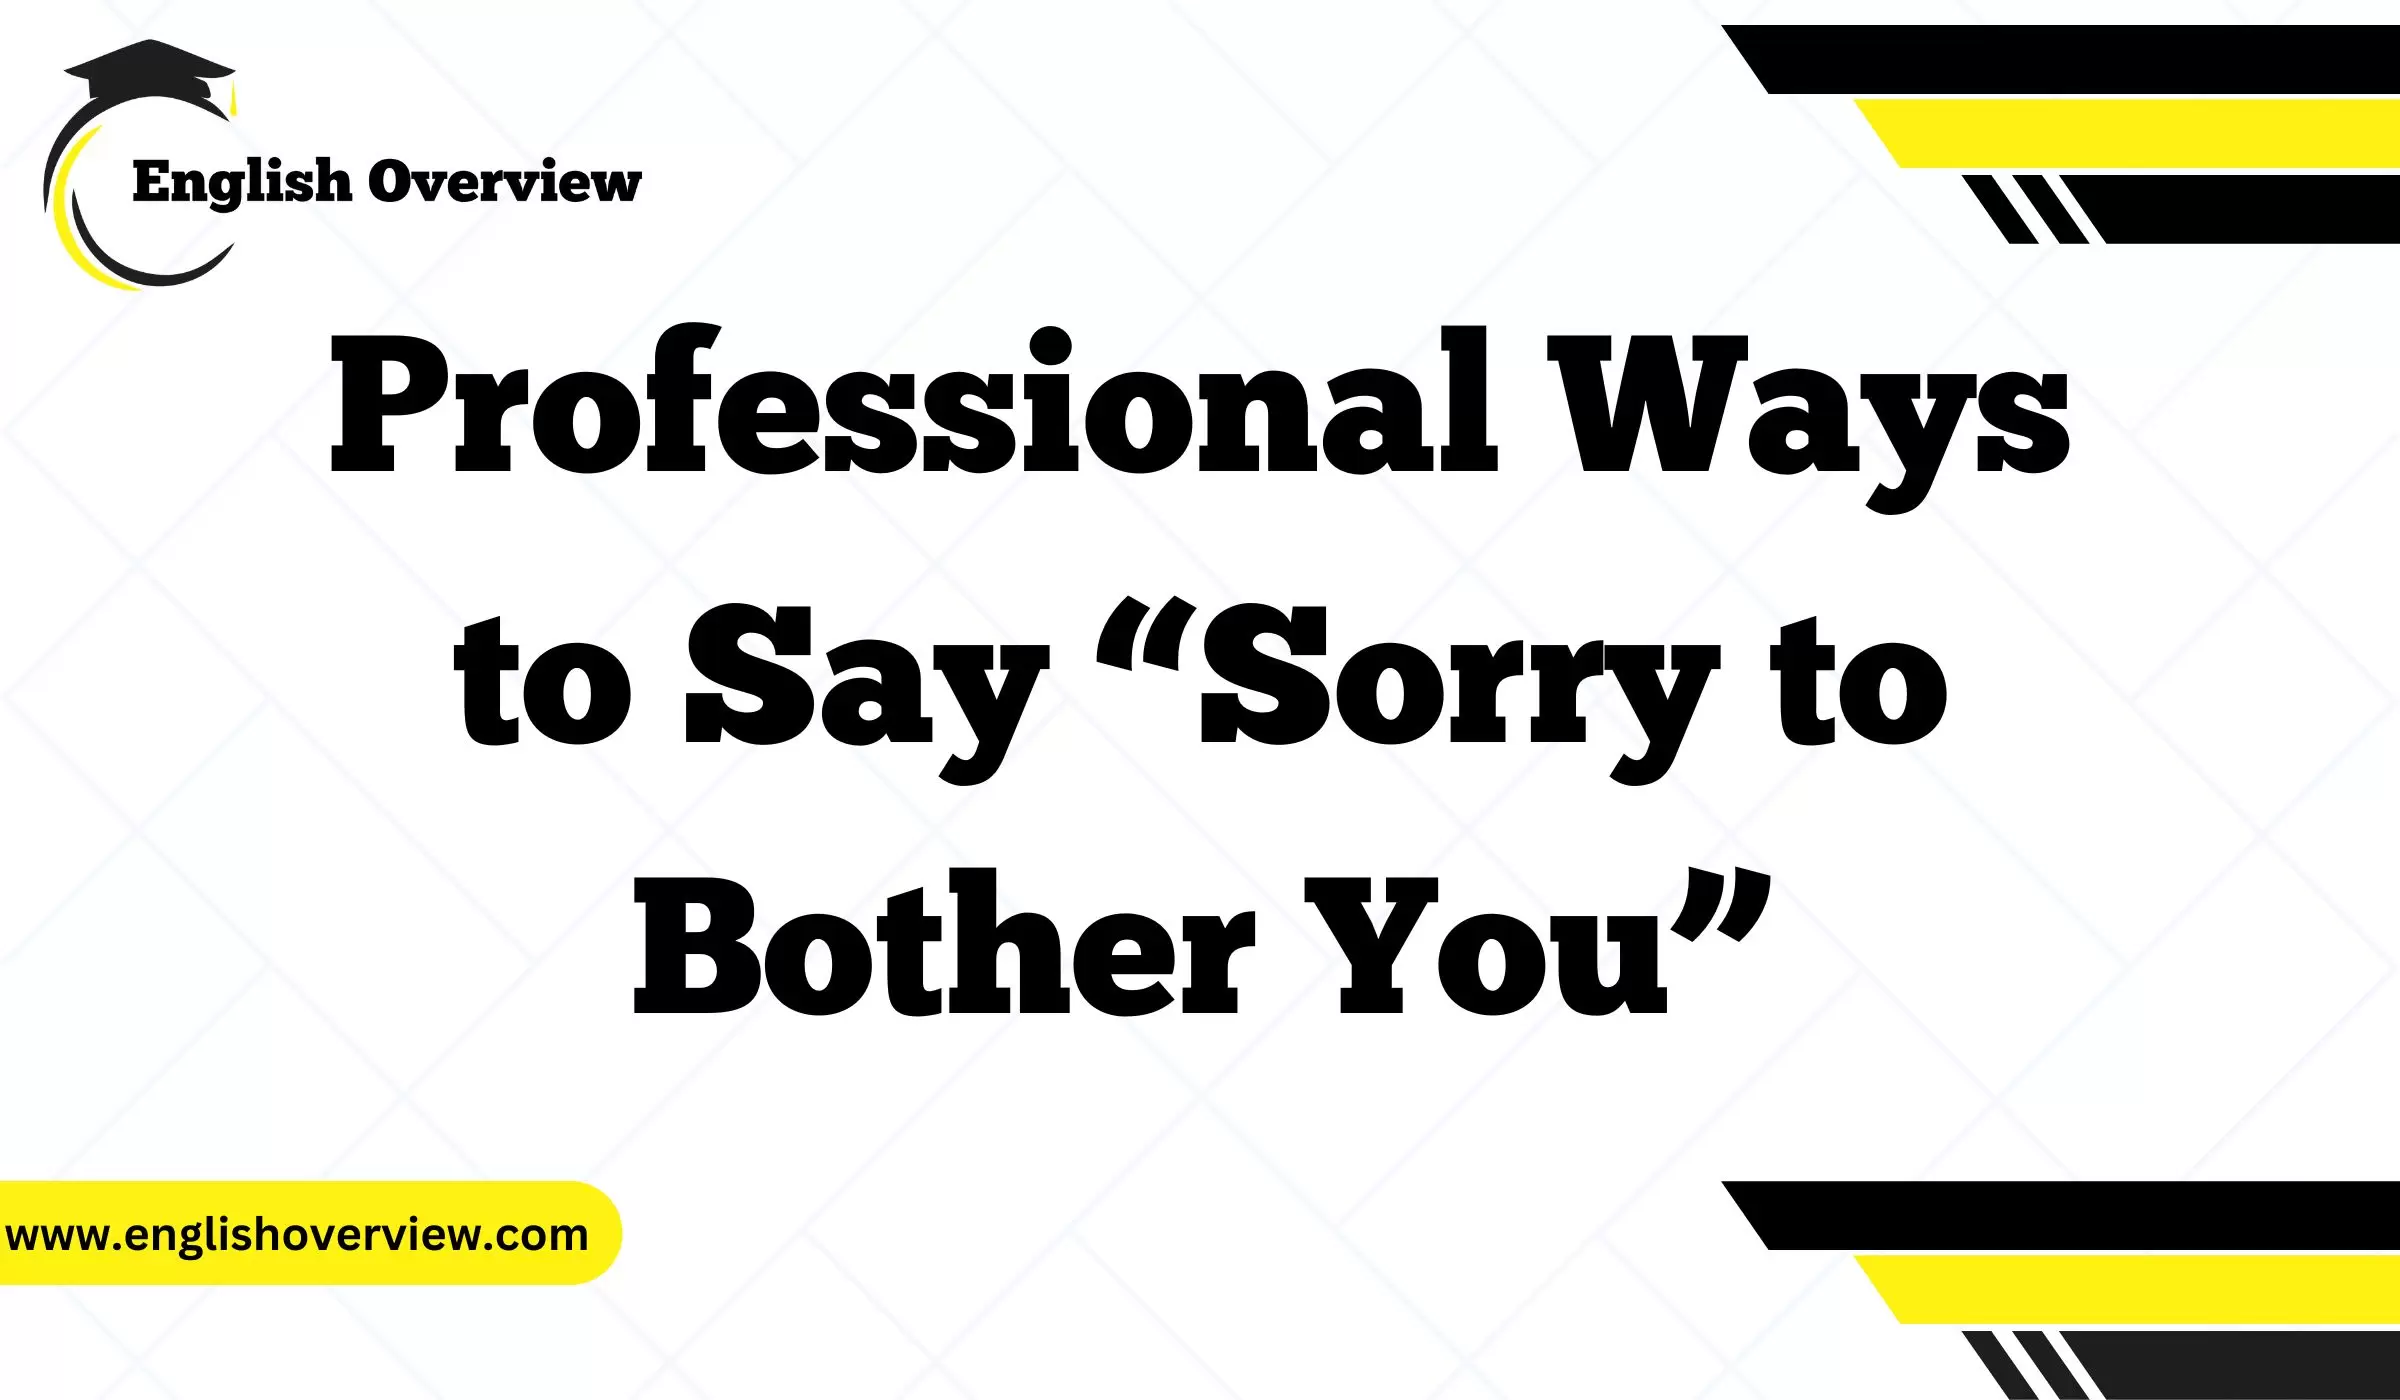 Professional Ways to Say “Sorry to Bother You”